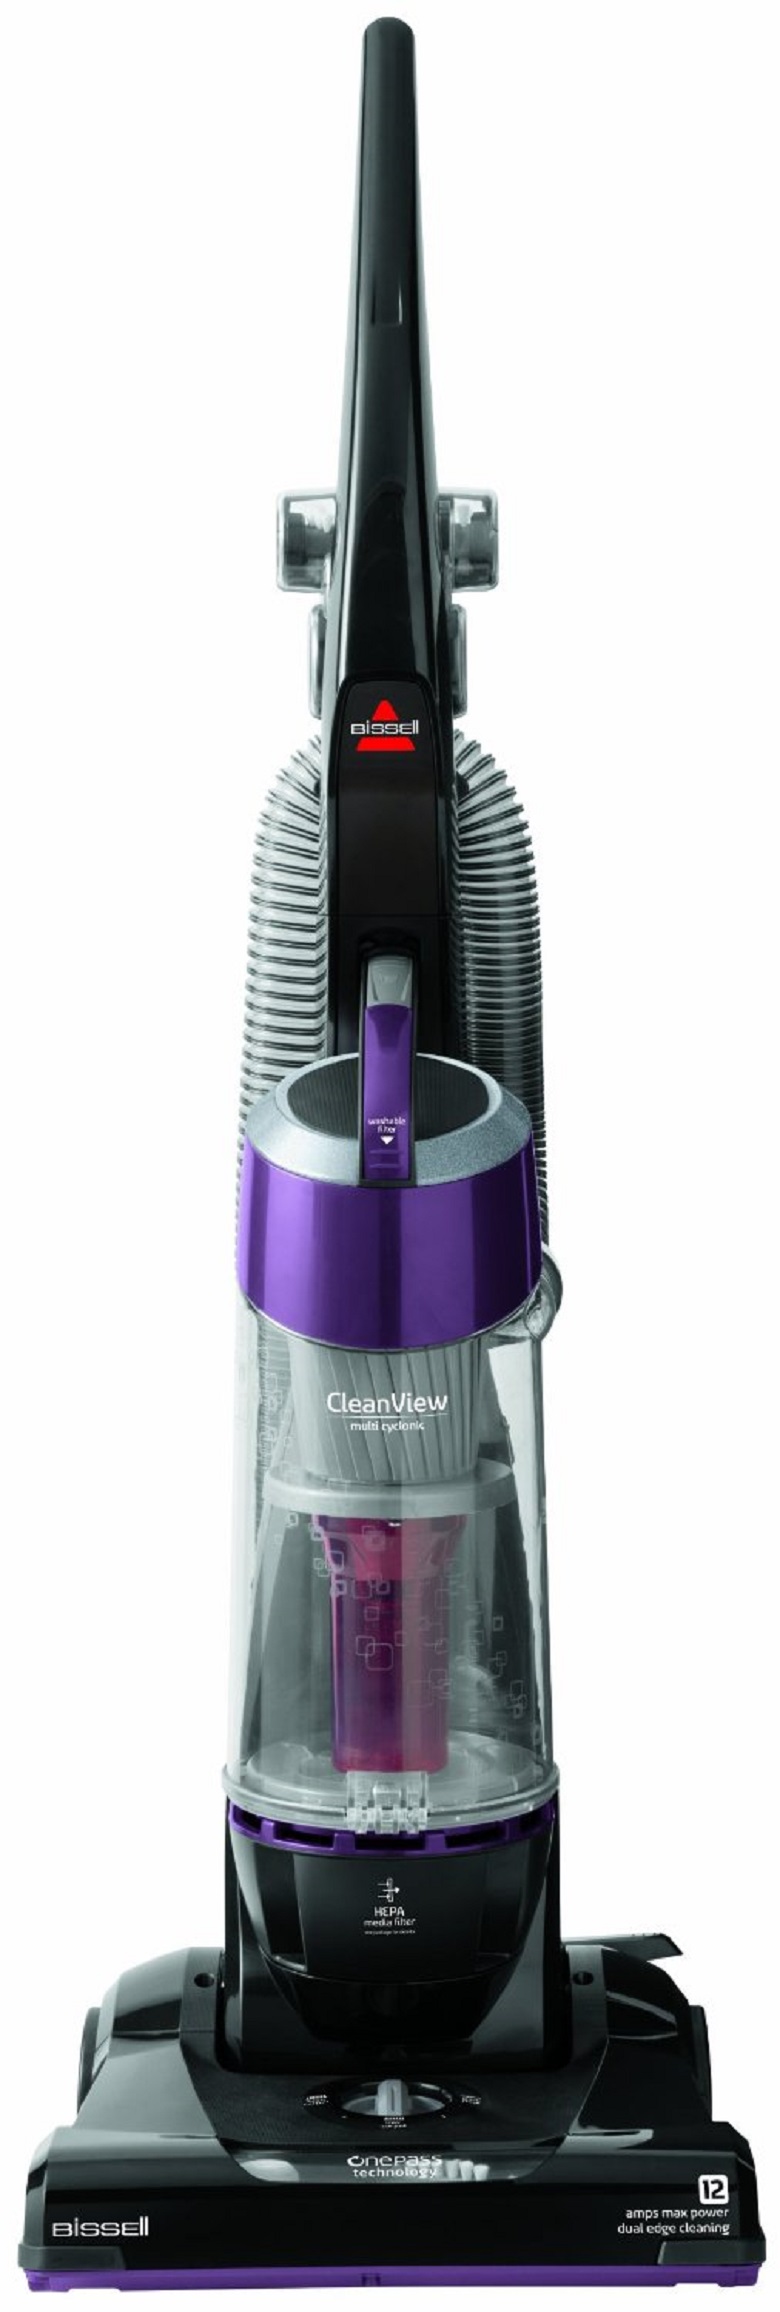 BISSELL CleanView Upright Vacuum, 9595A, BISSELL 9595, BISSELL 9595A, BISSELL CleanView Upright Vacuum with OnePass, 9595A, BISSELL upright vacuum, BISSELL vacuum, upright vacuum